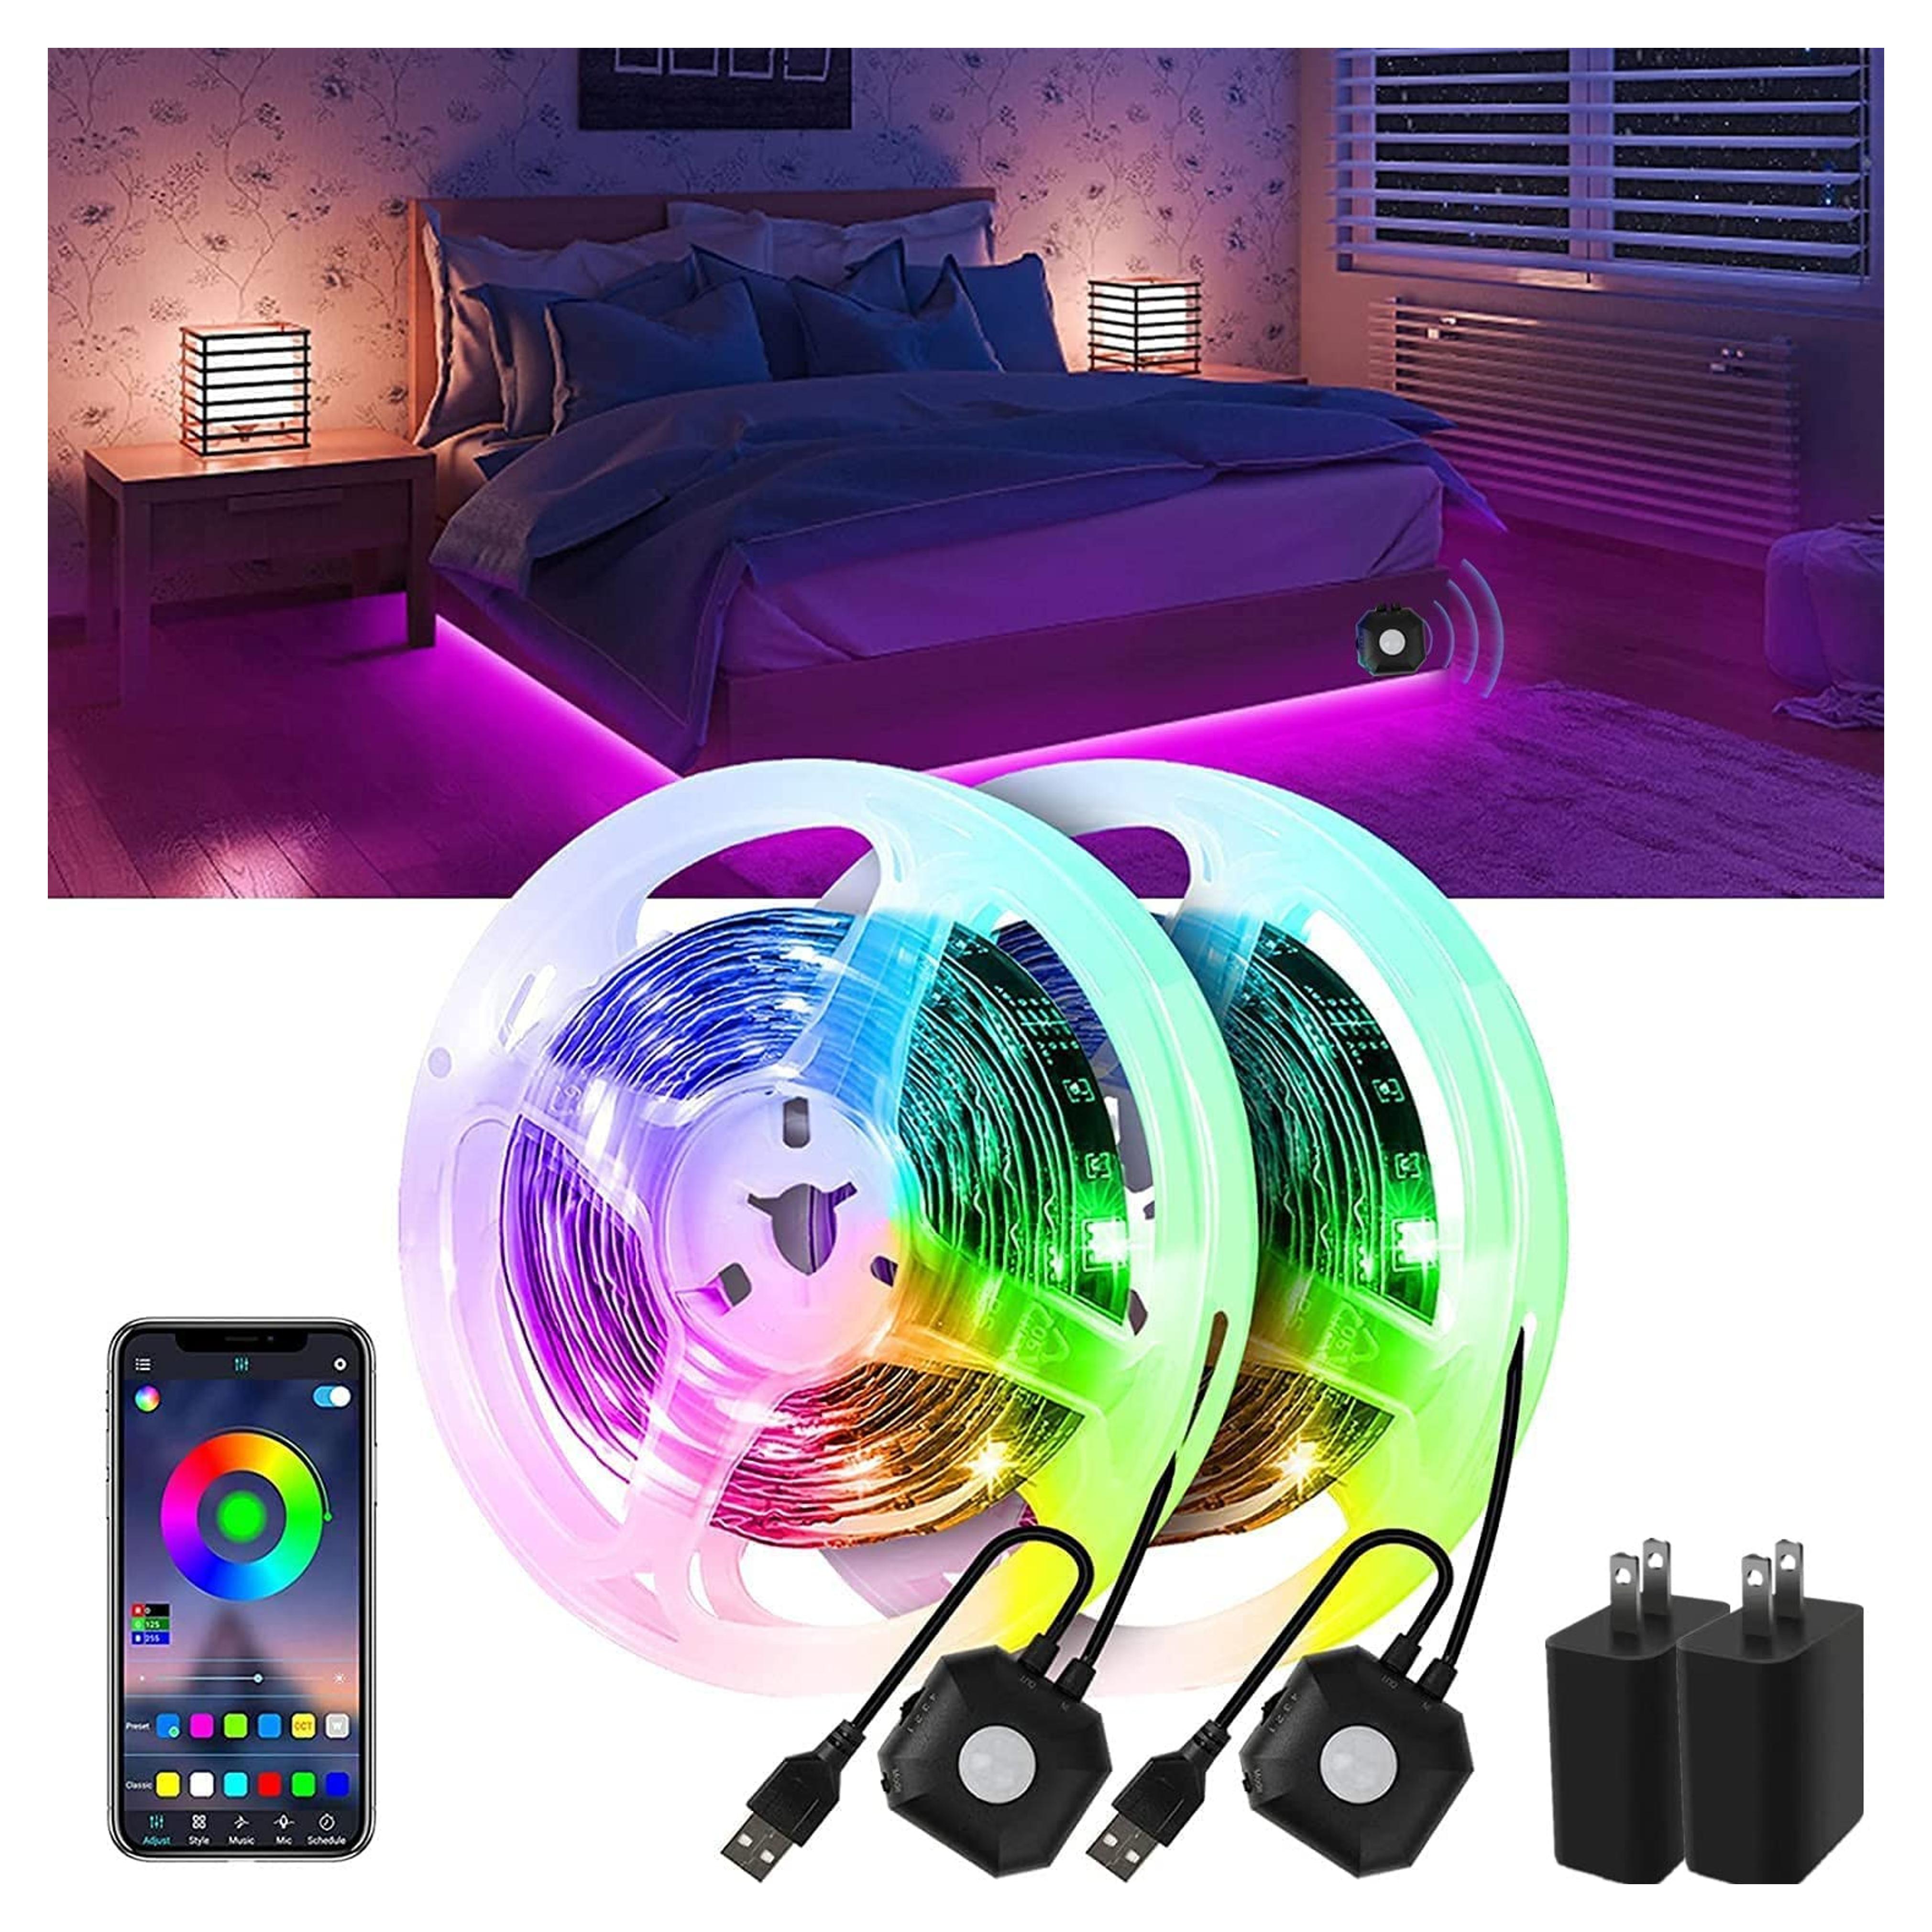 Motion Activated Under Bed Lights, Auplf 2x9.84ft 5050 RGB Color Changing LED Strip Lights with Sensor, APP Control and Music Sync, Dimmable Night Light with Automatic Shut Off Timer for Bedroom 19.68ft light strip